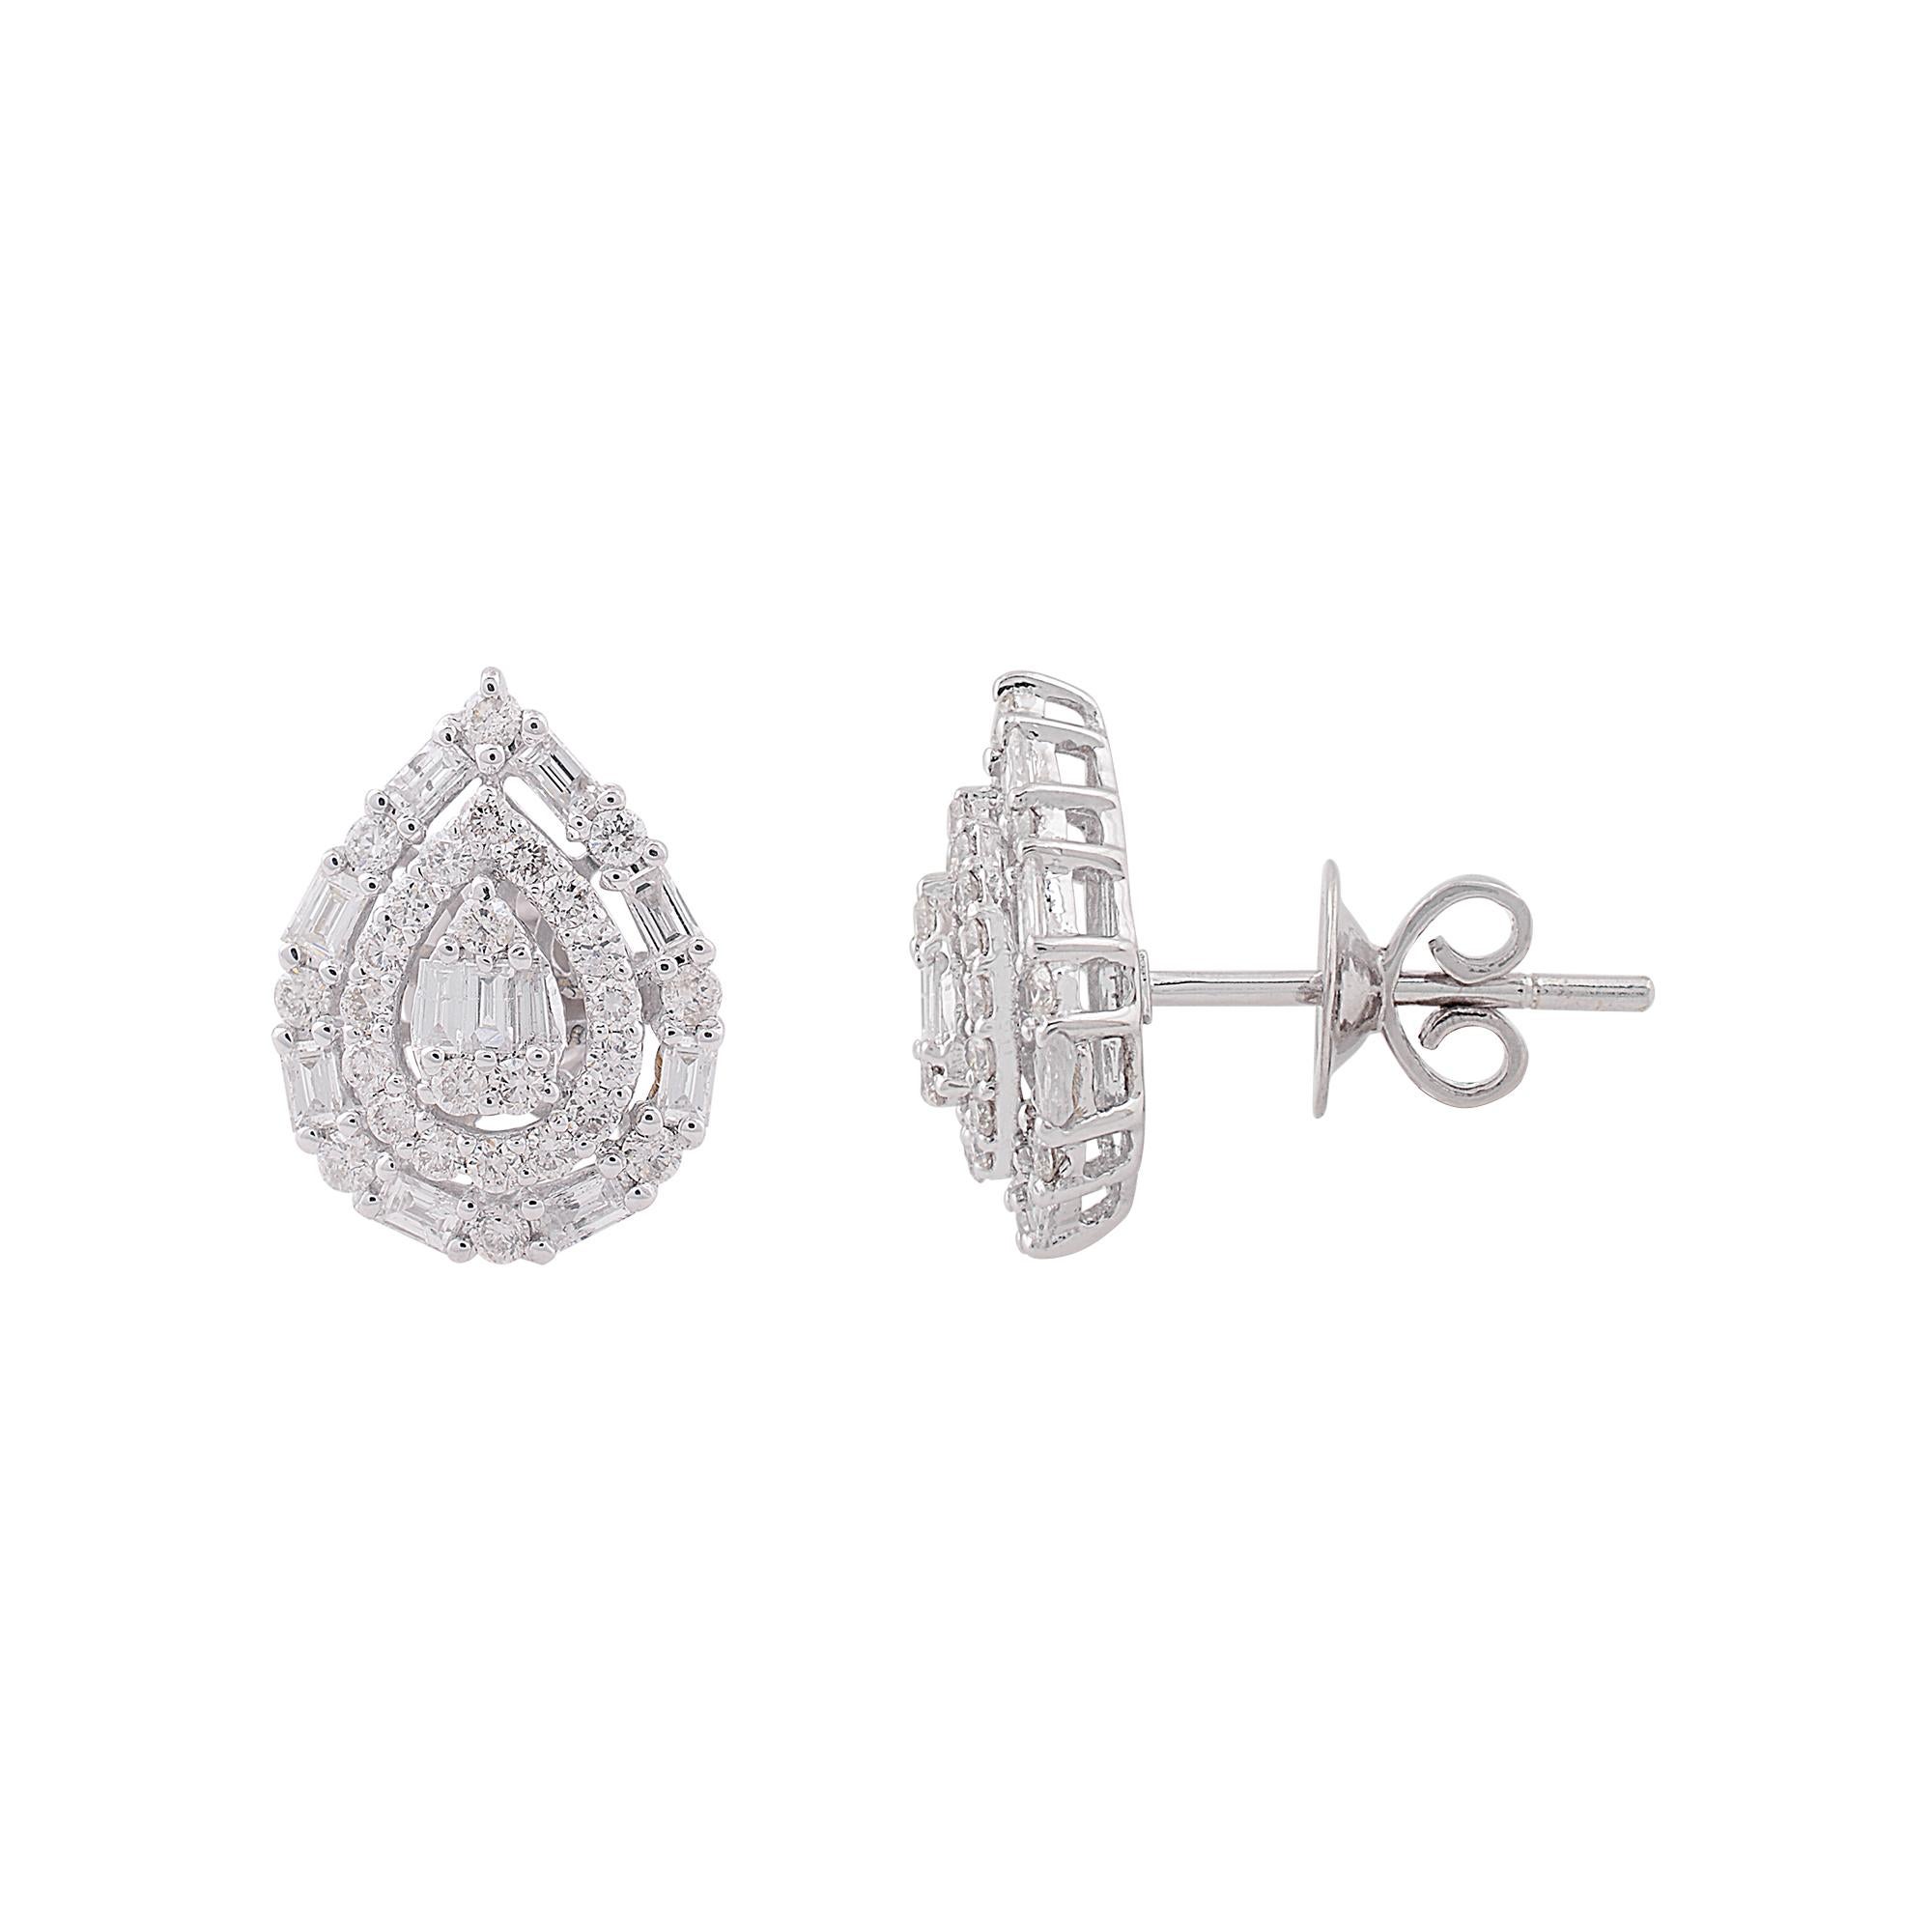 Item Code :- SEE-1500A
Gross Weight :- 4.03 gm
14k Solid White Gold Weight :- 3.70 gm
Natural Diamond Weight :- 1.65 carat  ( AVERAGE DIAMOND CLARITY SI1-SI2 & COLOR H-I )
Earrings Length :- 17 mm approx.

✦ Sizing
.....................
We can